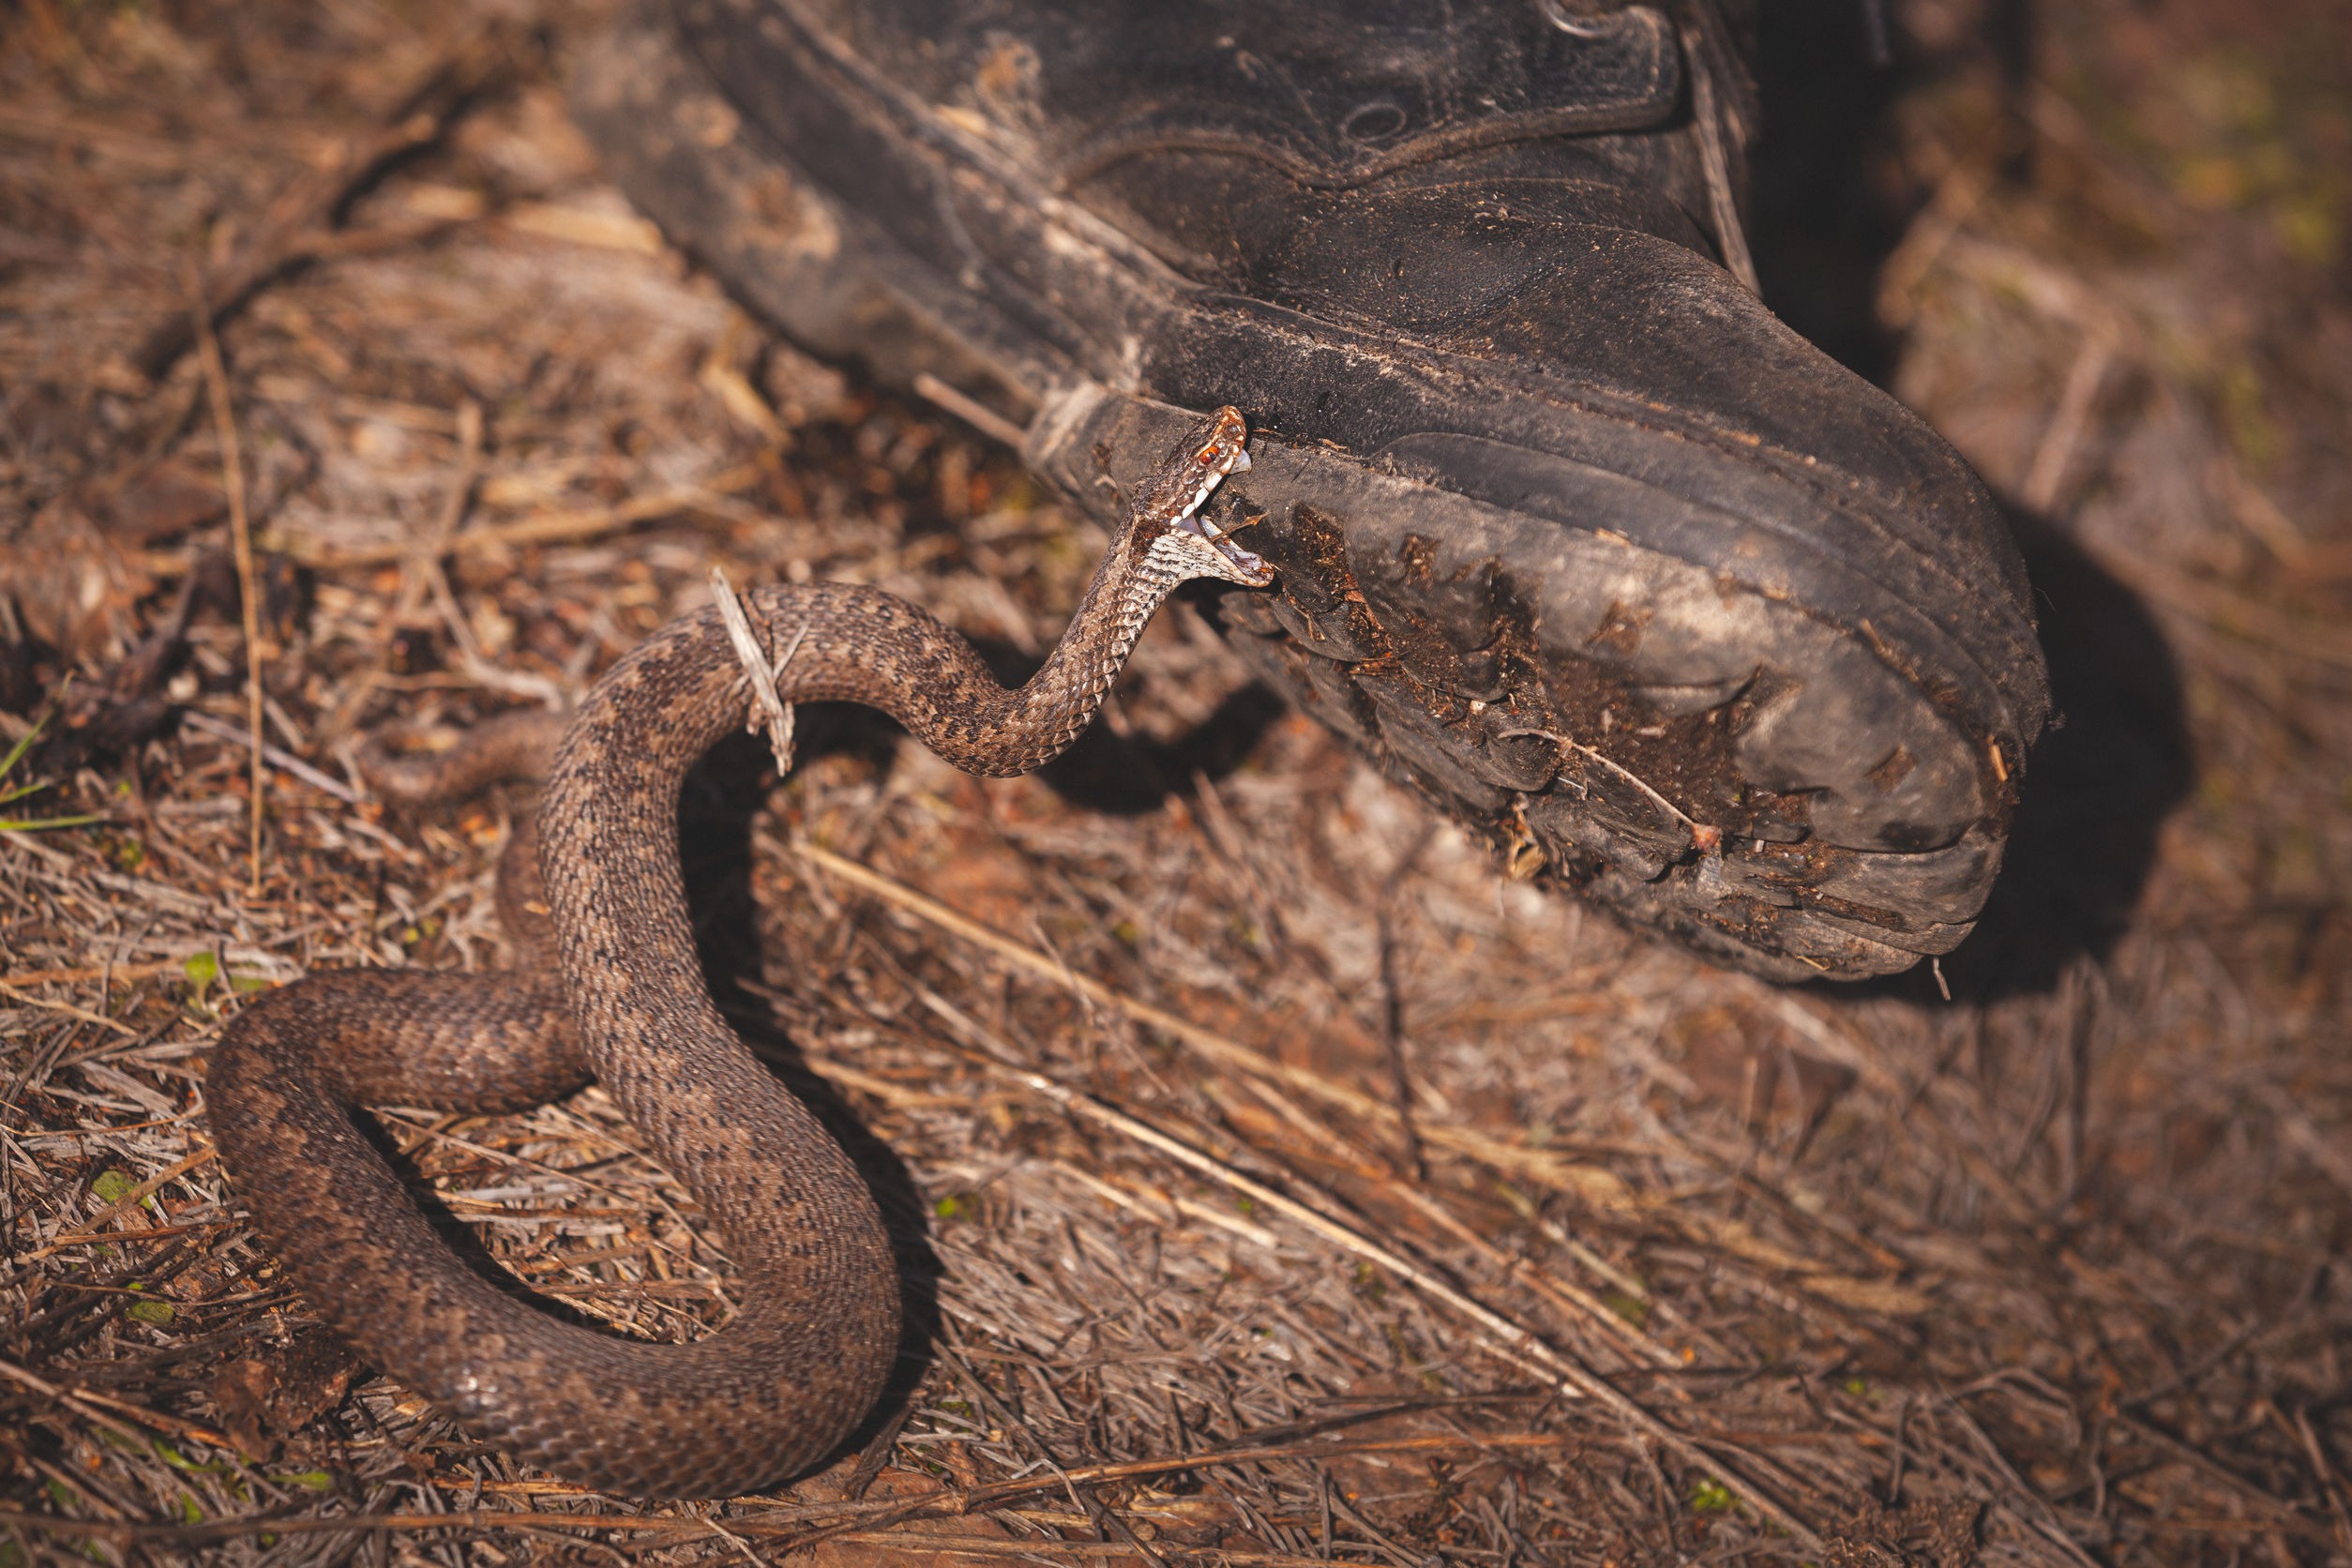 Can a Rattlesnake Bite Through Leather Boots?